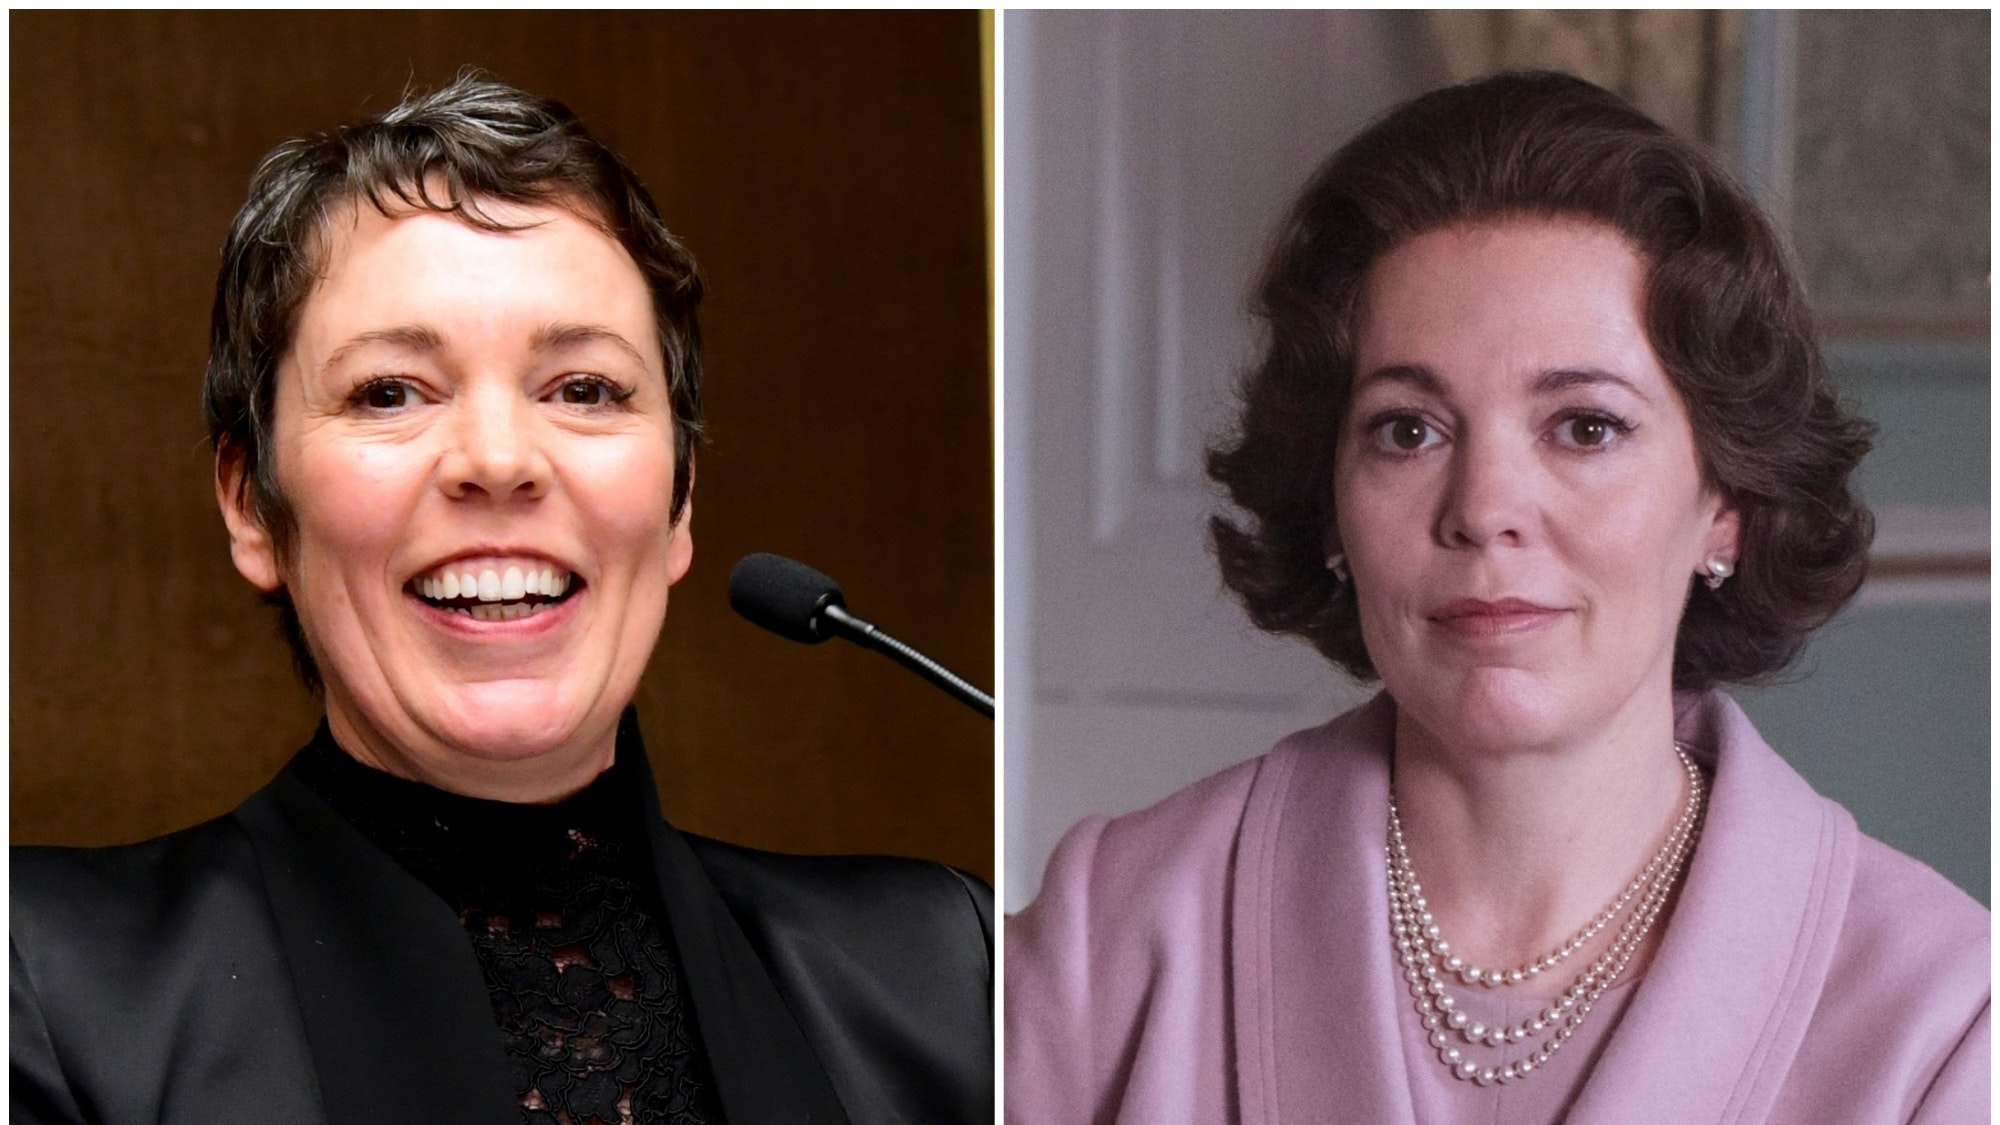 Olivia Colman takes on the role of the Queen in the latest series of The Crown